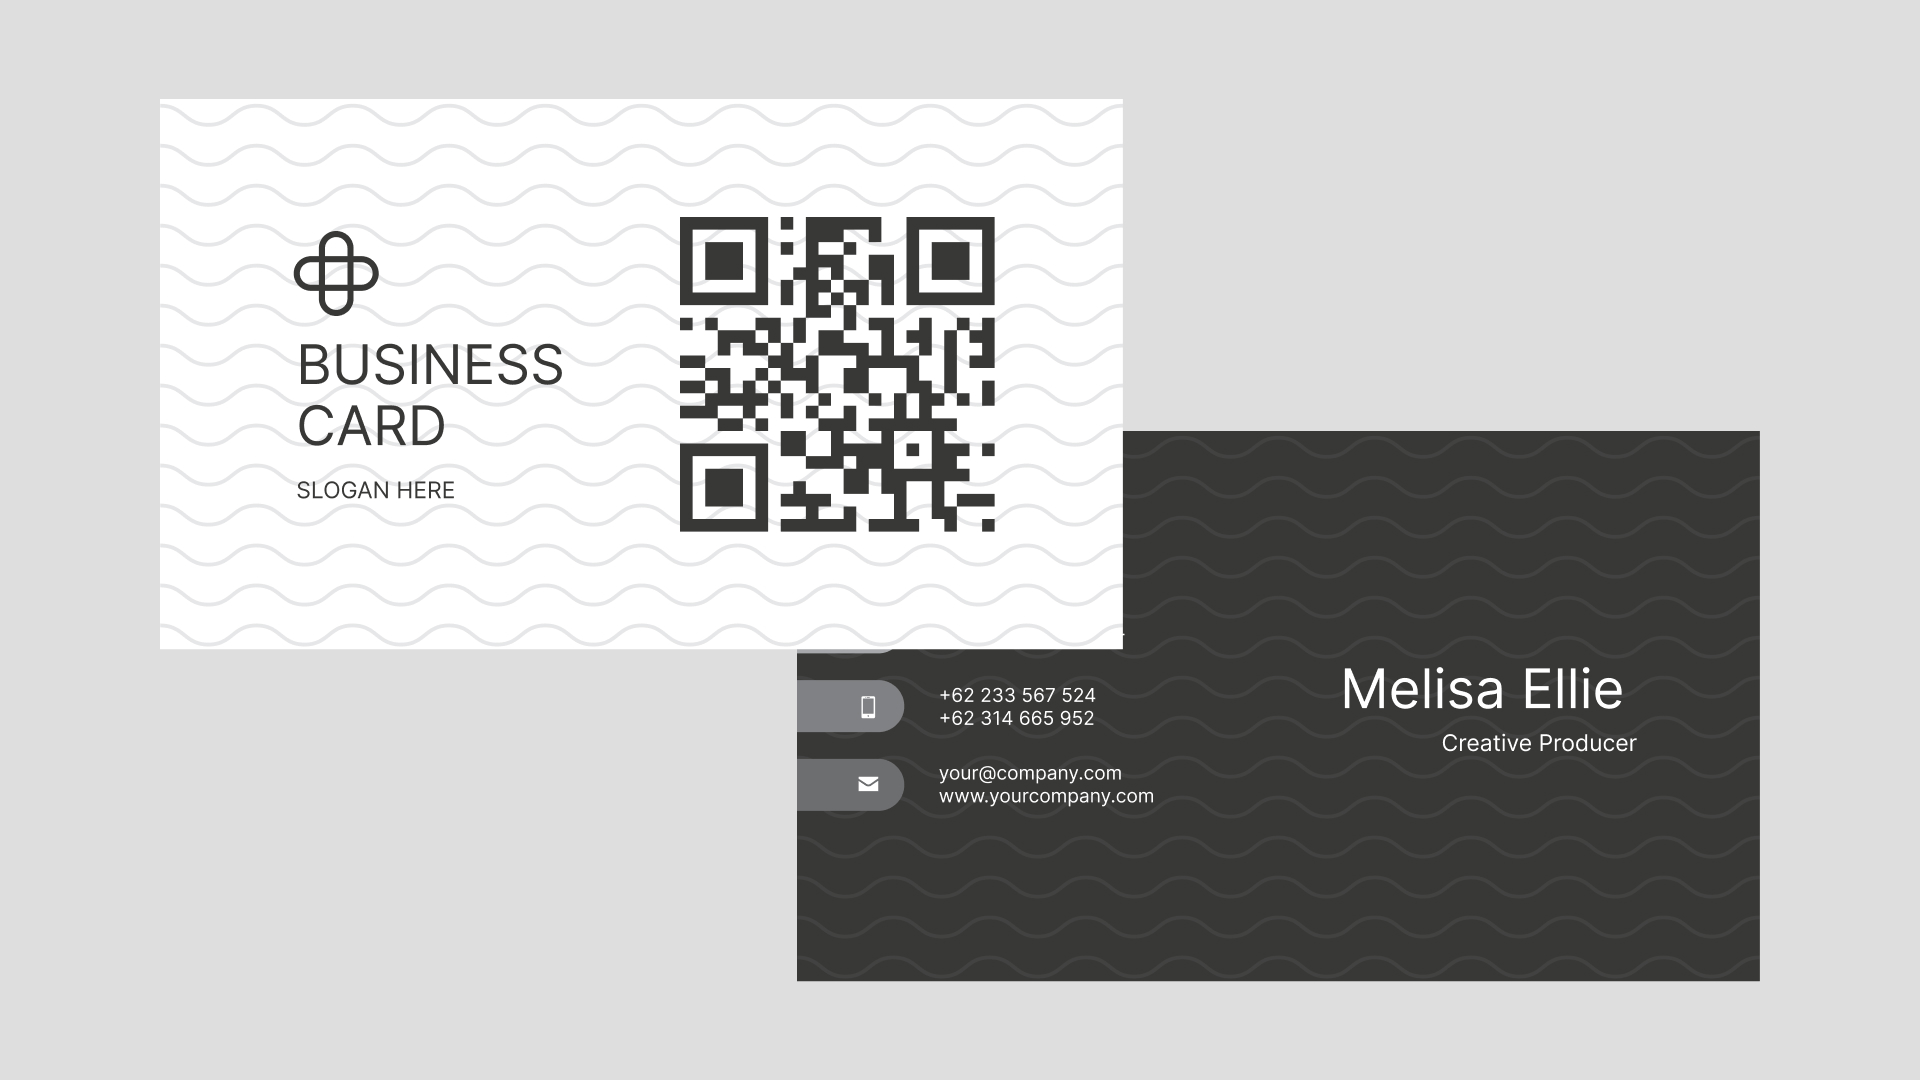 Business card with QR code scanning option to access information.